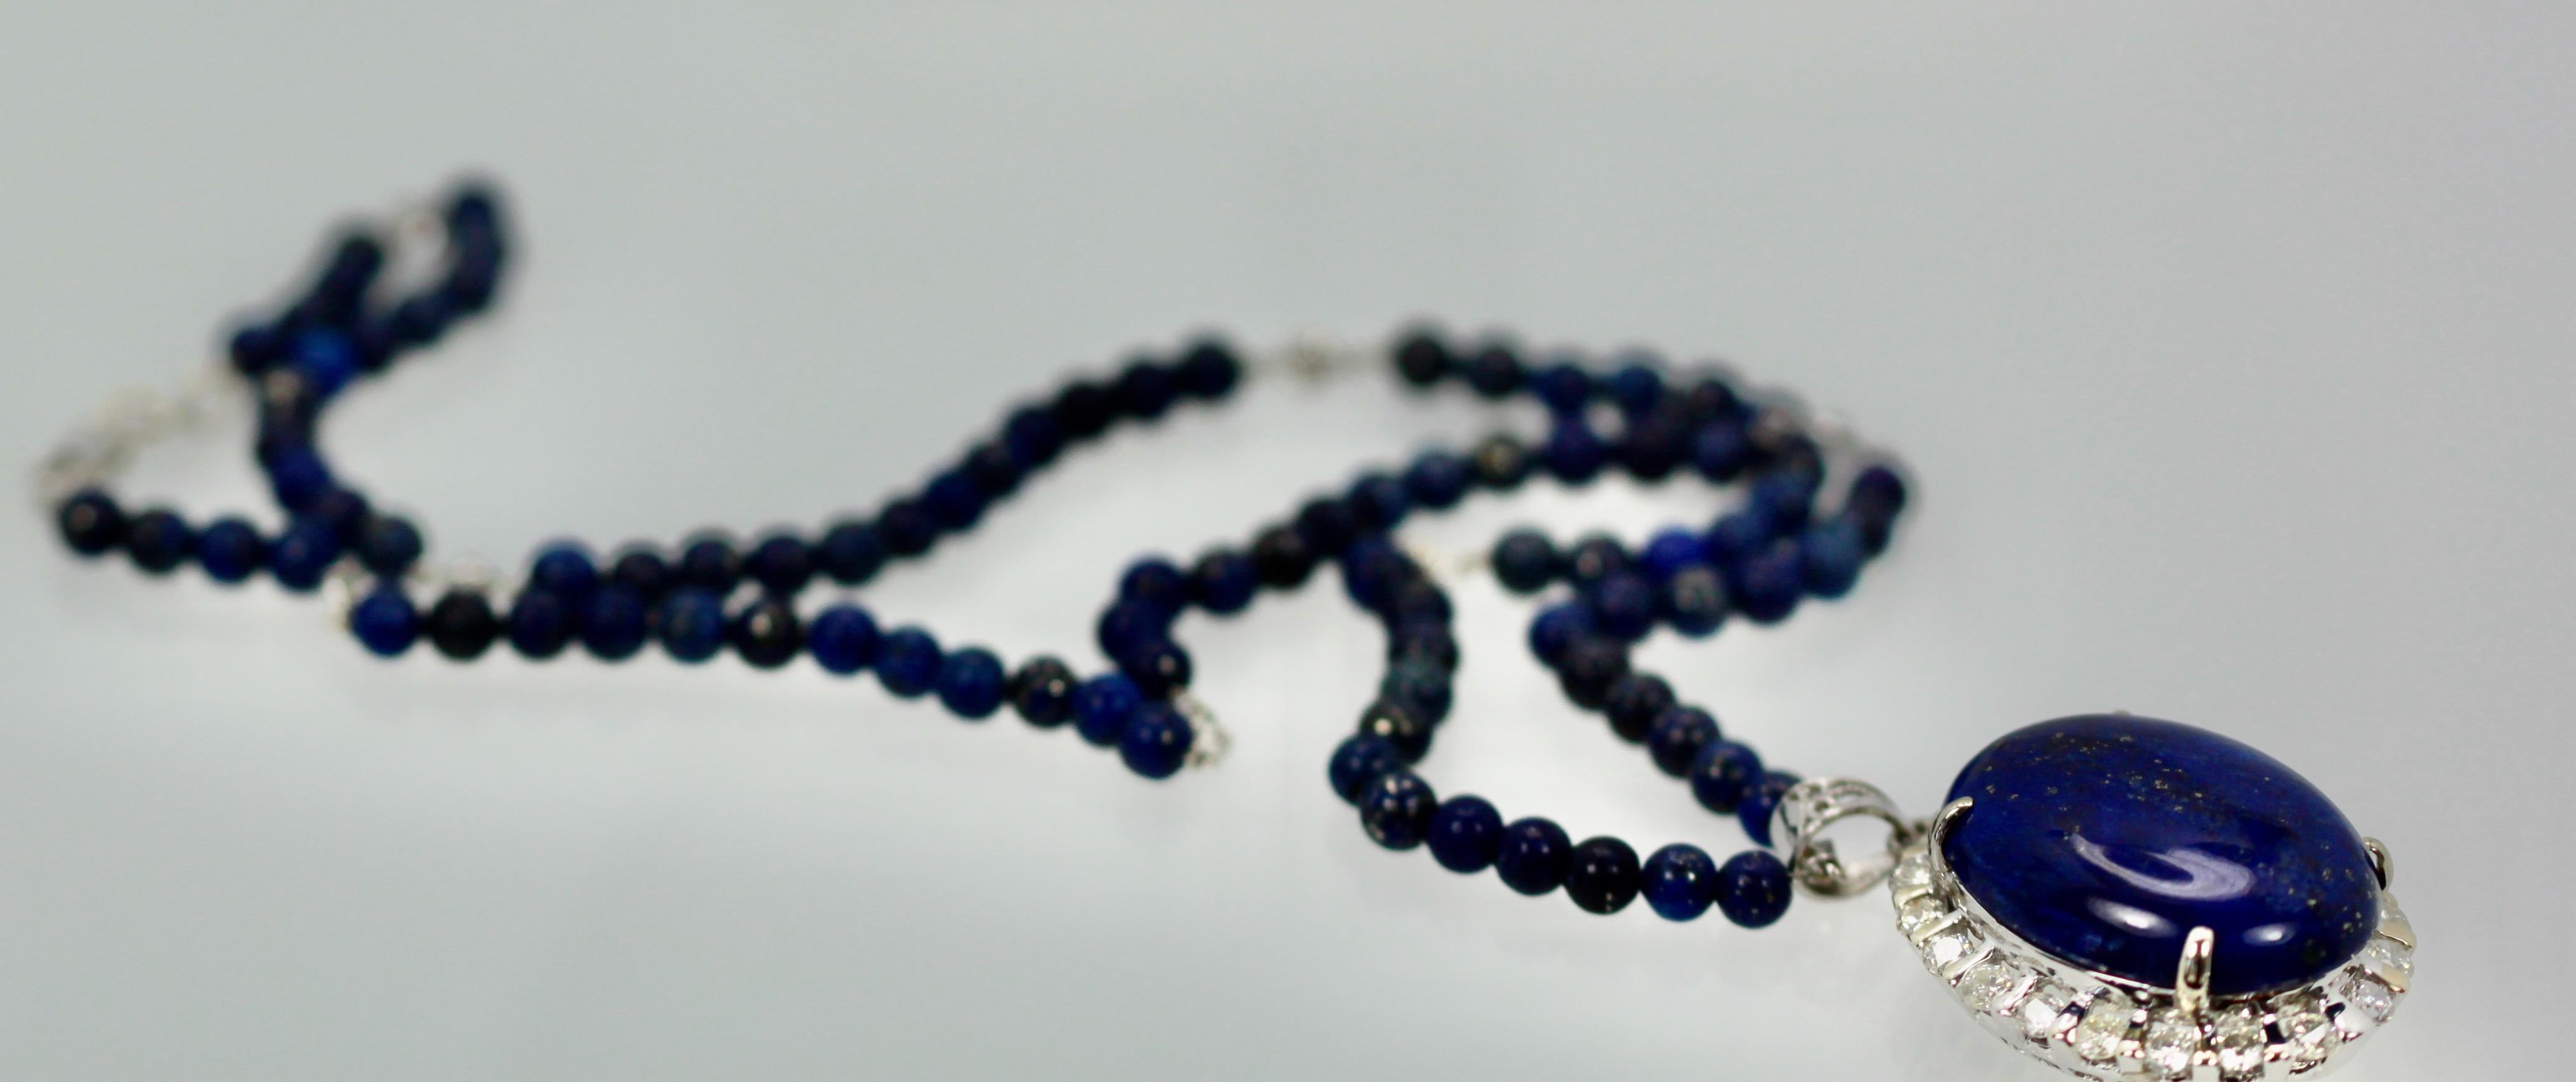 This fine gem quality Lapis Lazuli Pendant is 25mm in a 30mm x 30 mm mount. The Diamonds surrounding the pendant boosts 2.00 carats of Diamonds.  This pendant can be worn on a white gold chain or on this beaded Lapis chain. The Lapis beads are 4.5mm